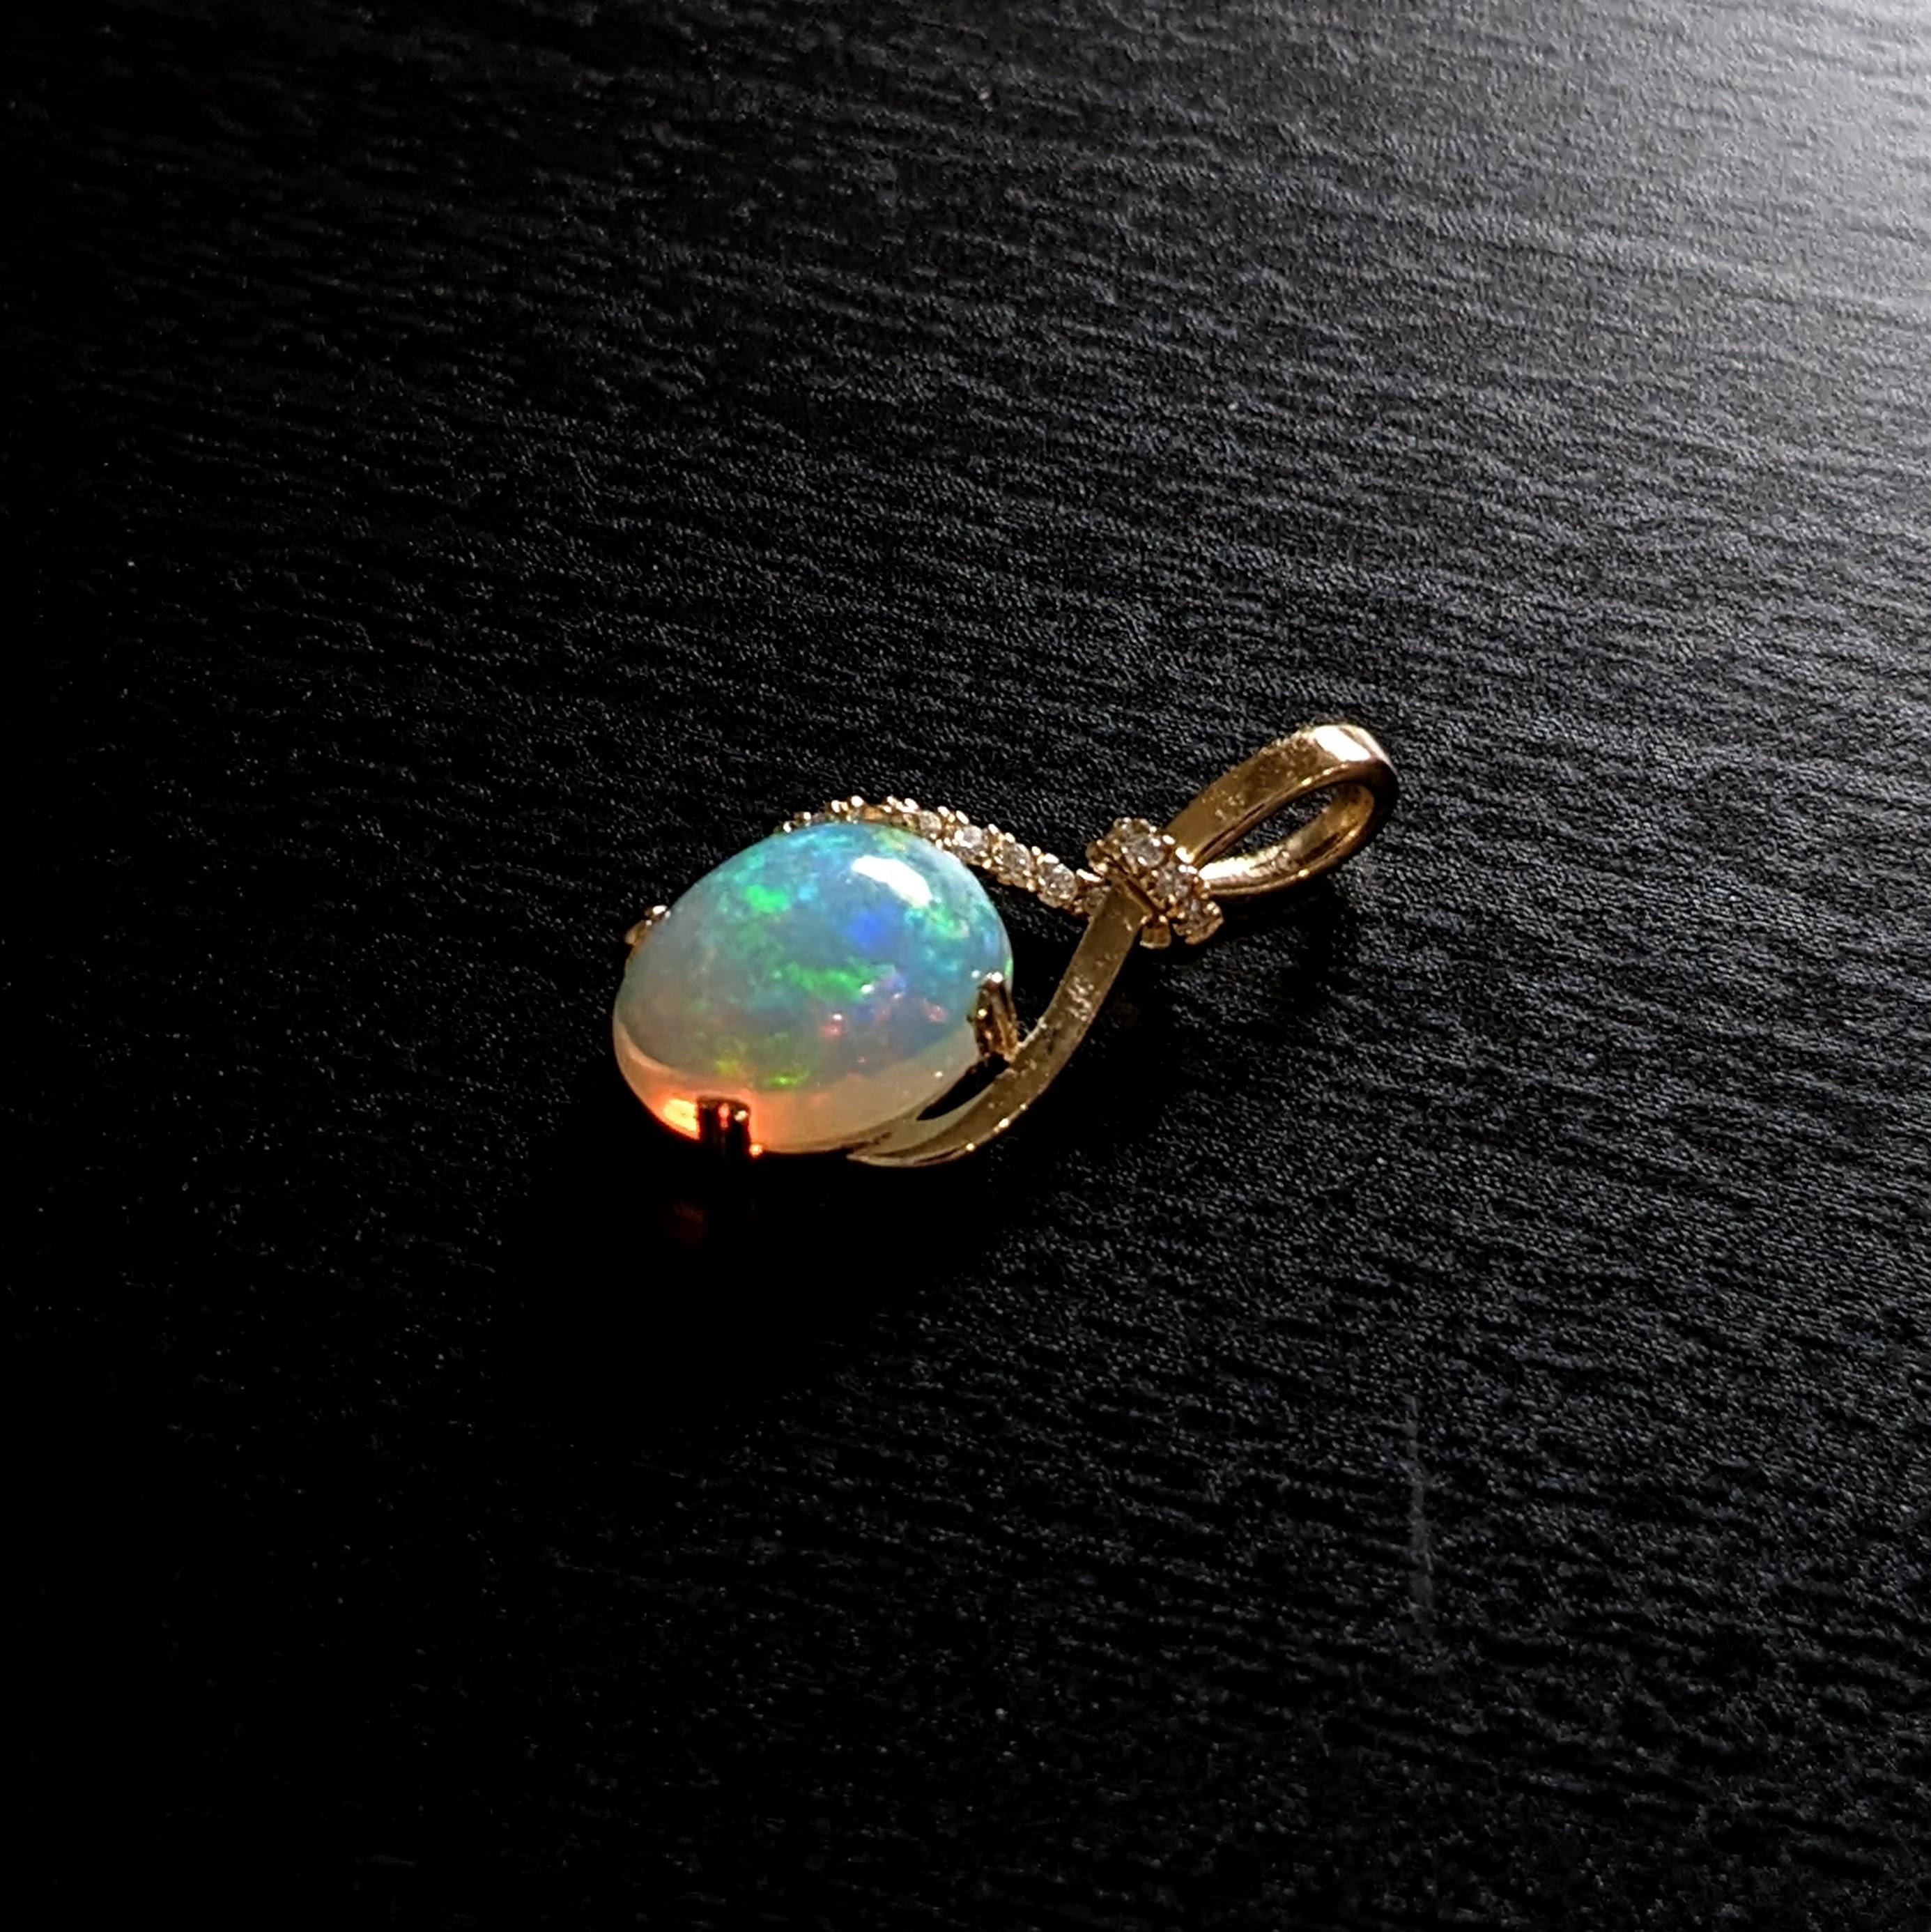 This beautiful infinity pendant features a 3.29 carat oval opal gemstone with natural earth mined diamonds all set in solid 14K gold. This pendant makes a beautiful October birthstone gift for your loved ones! 

Specifications

Item Type: